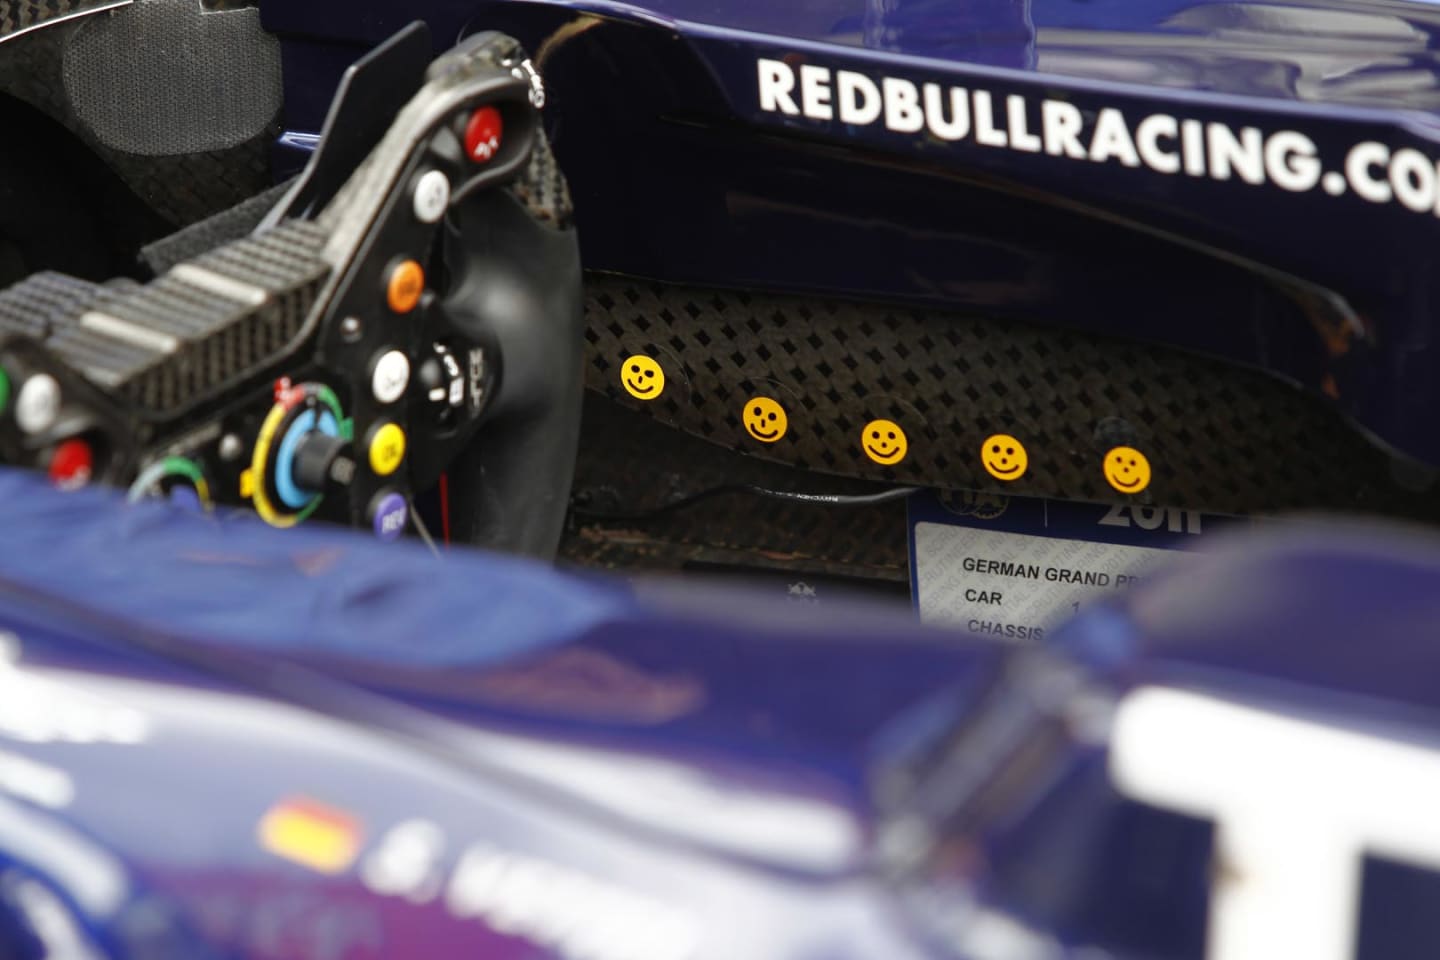 Nurburgring, Germany
23rd July 2011
The cockpit of the car of Sebastian Vettel, Red Bull Racing RB7